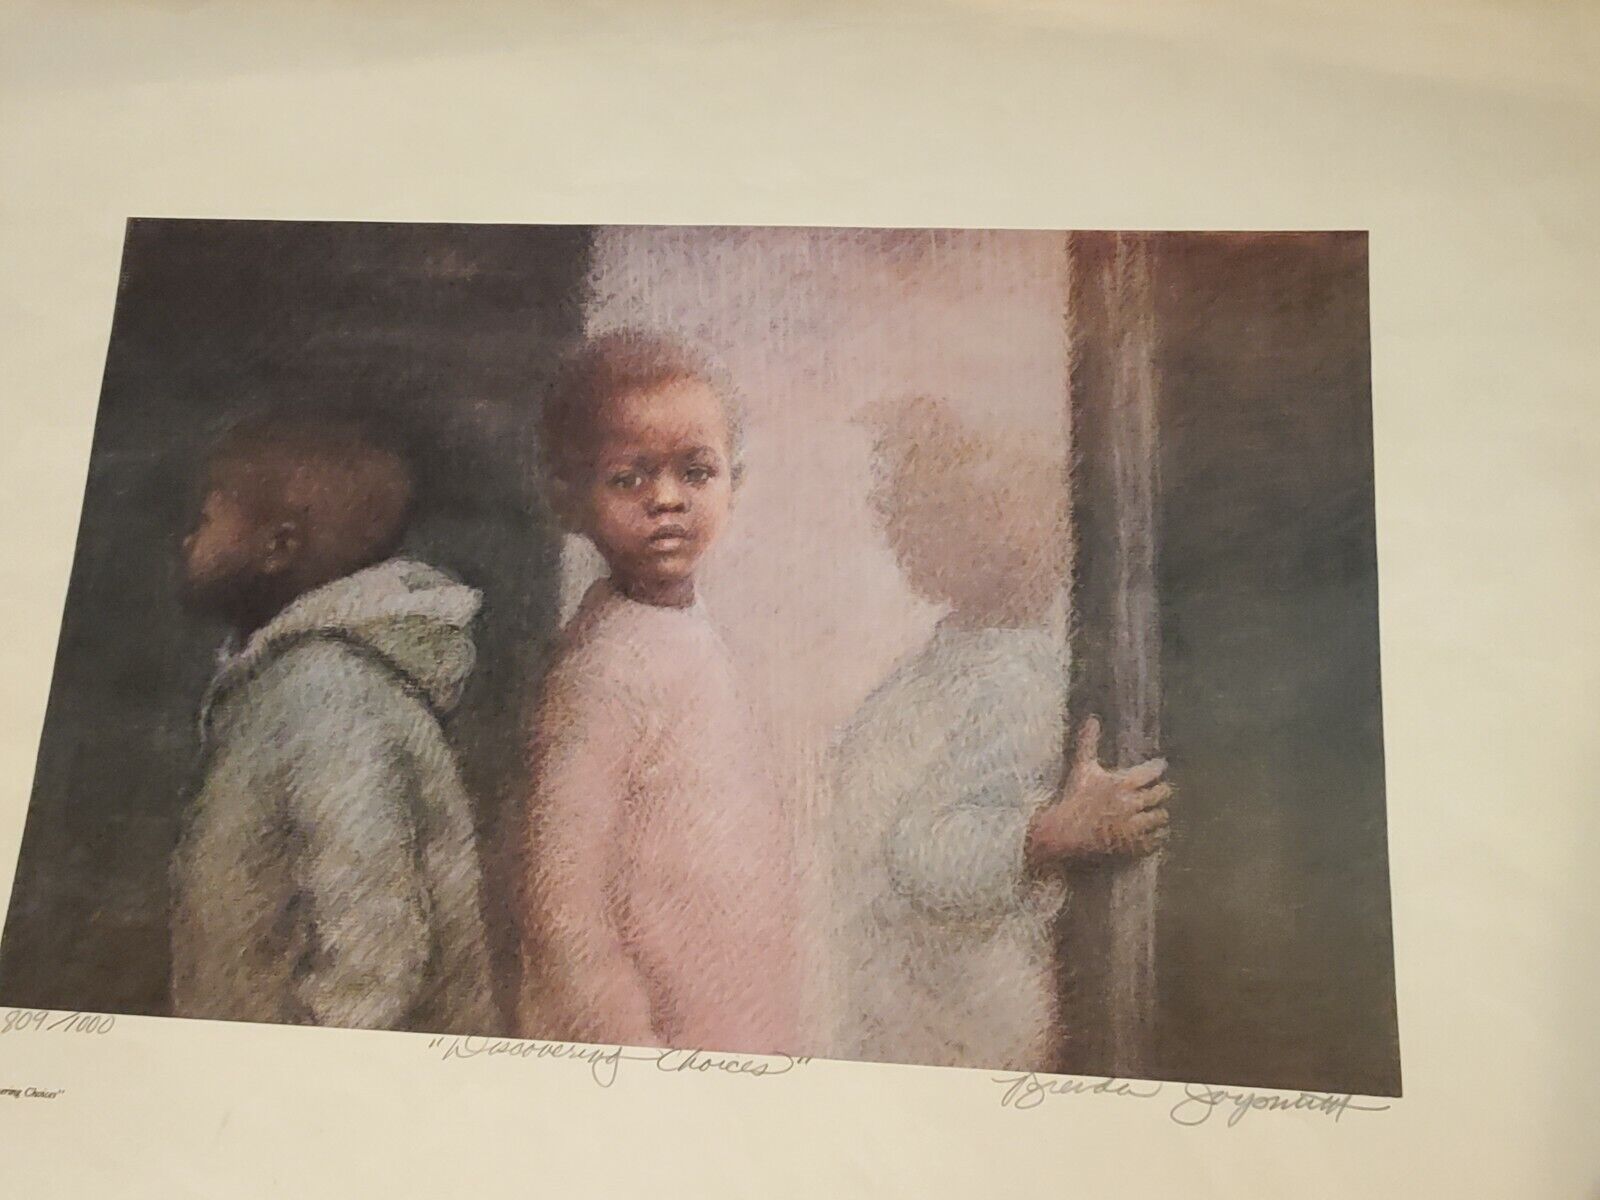 DISCOVERING CHOICES BY BRENDA JOYSMITH (# LITHOGRAPH)